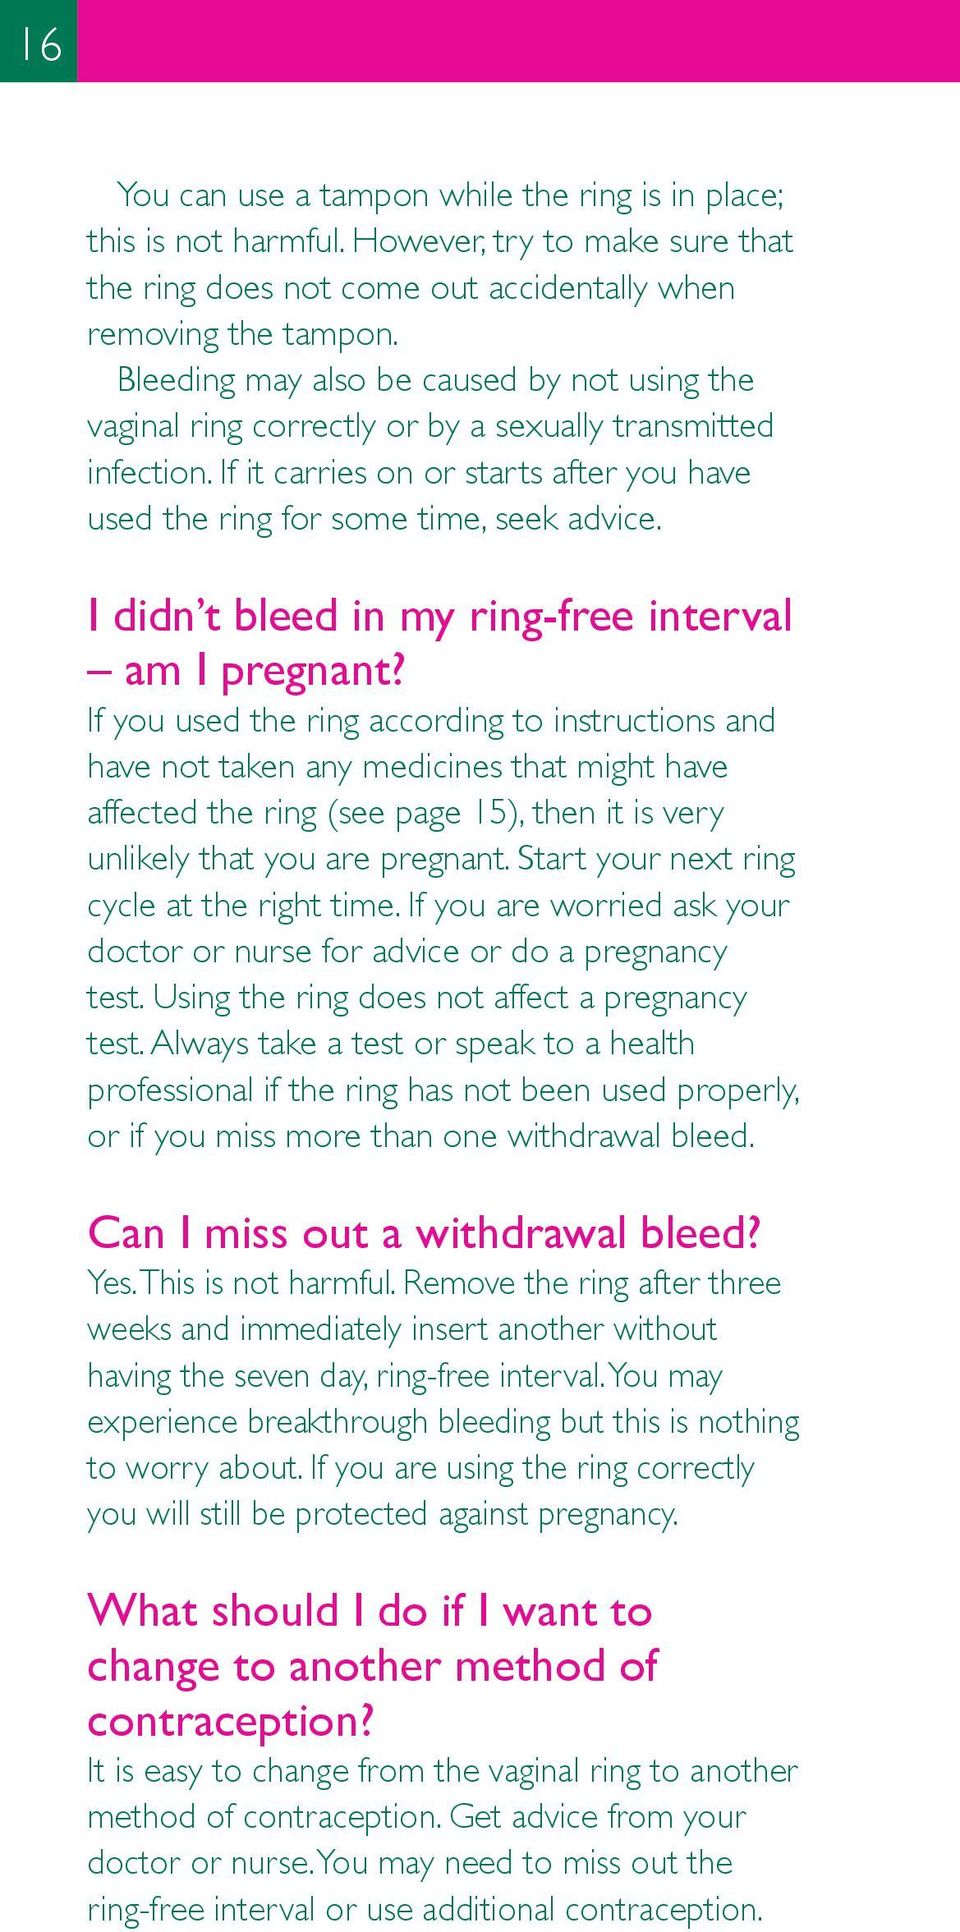 I didn t bleed in my ring-free interval am I pregnant?